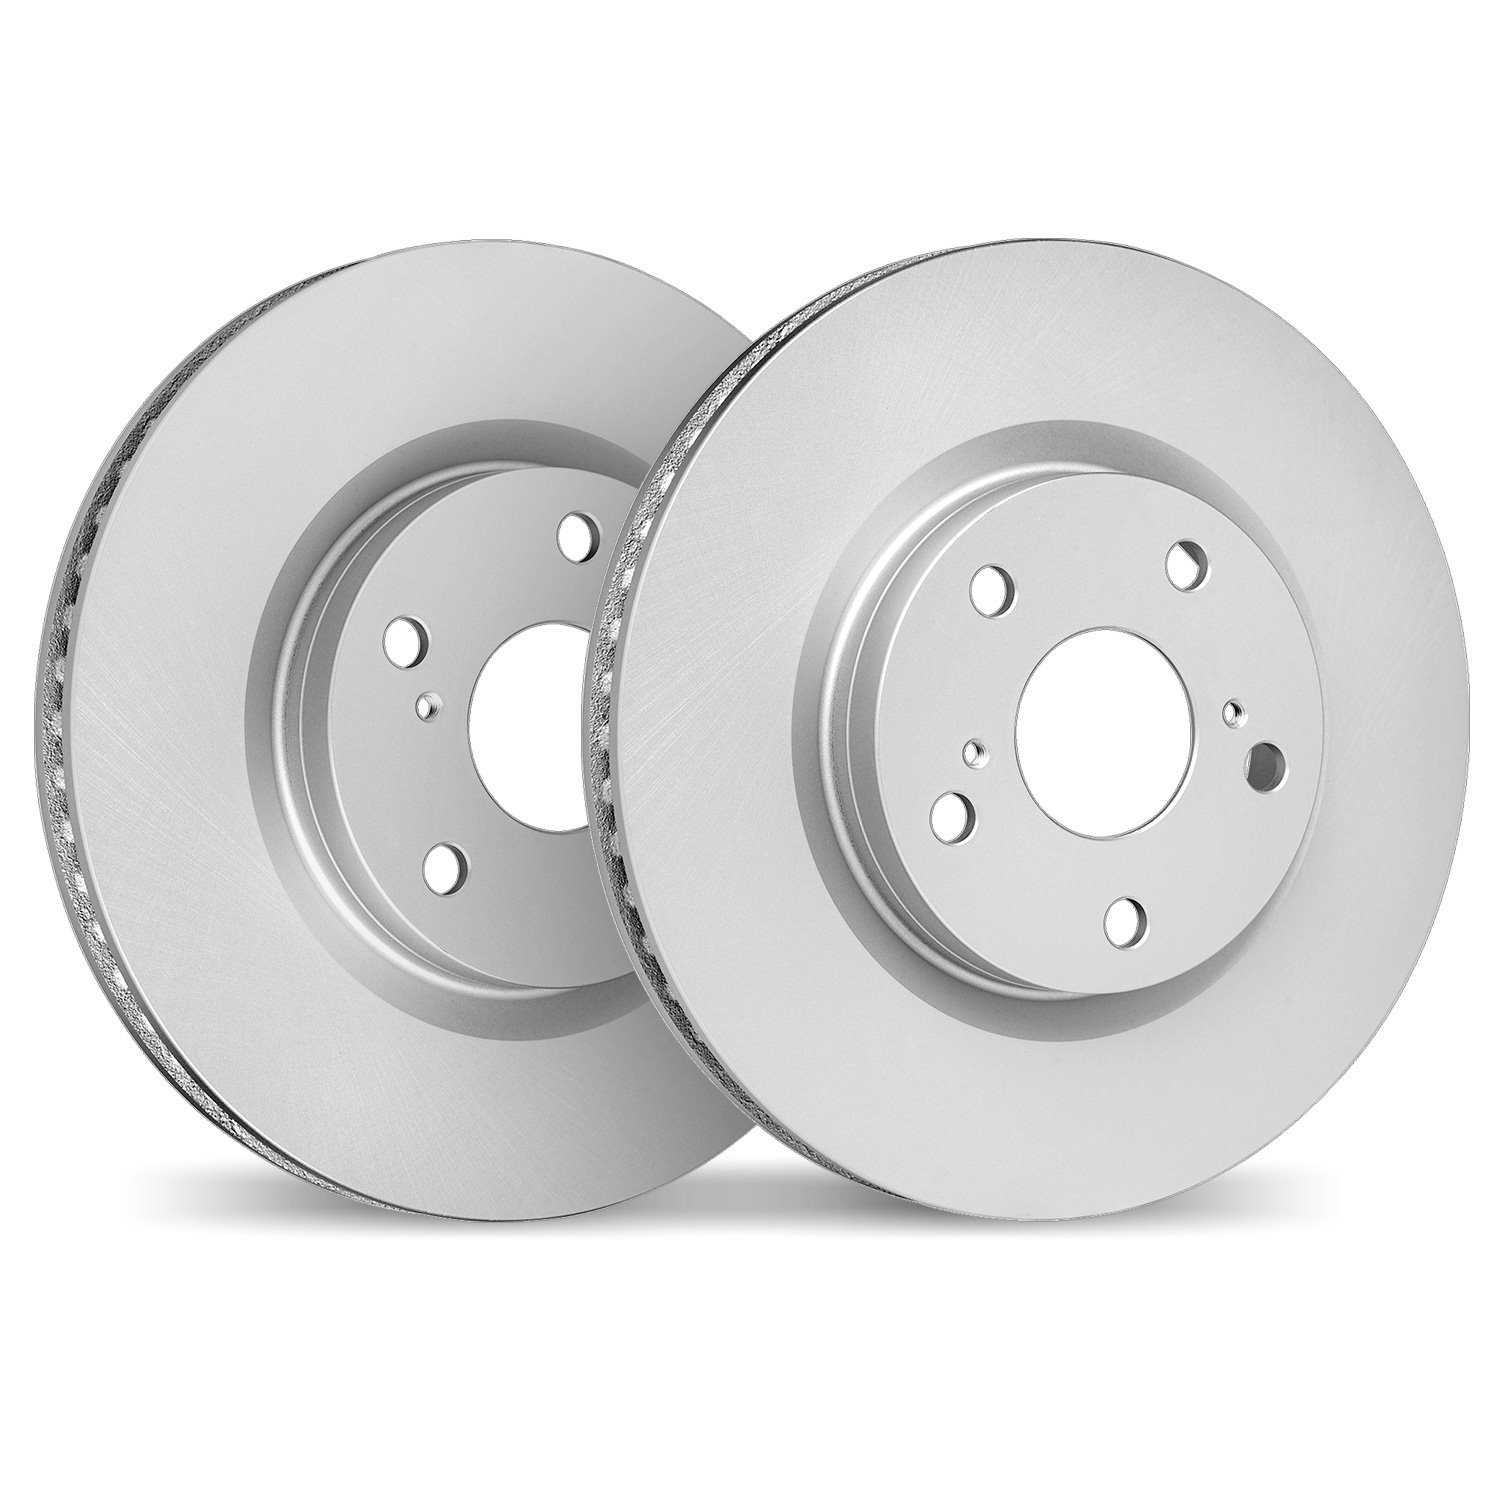 4002-54175 Geospec Brake Rotors, Fits Select Ford/Lincoln/Mercury/Mazda, Position: Front